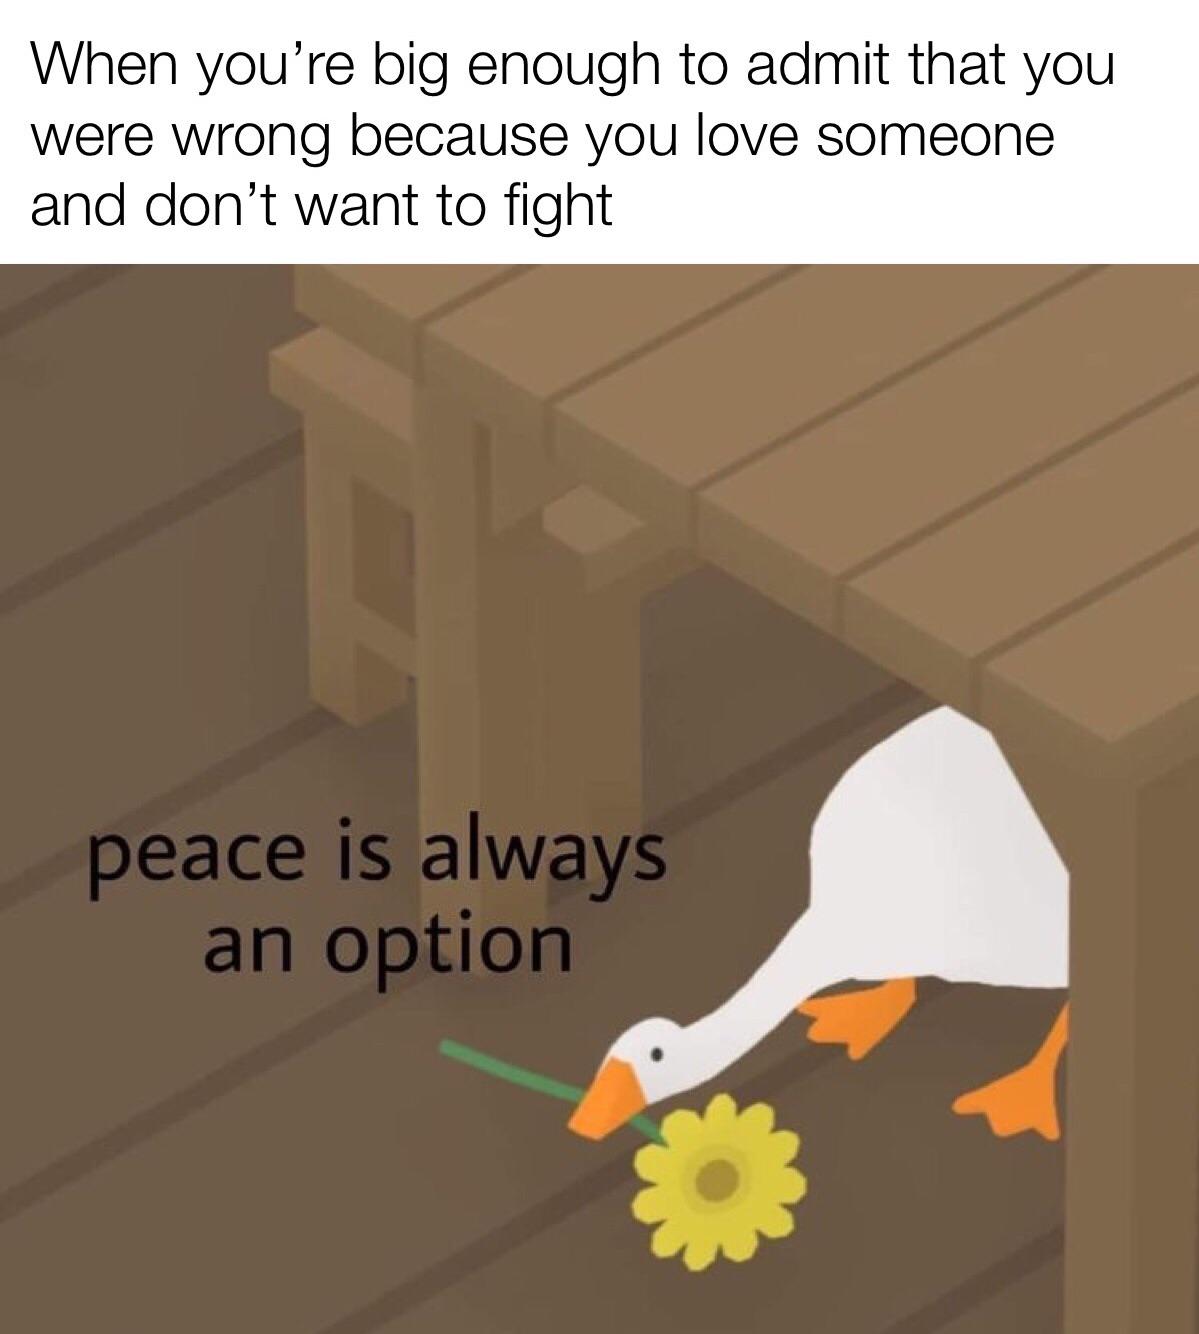 Wholesome memes,  Wholesome Memes Wholesome memes,  text: When you're big enough to admit that you were wrong because you love someone and don't want to fight 1 peace is always an option 